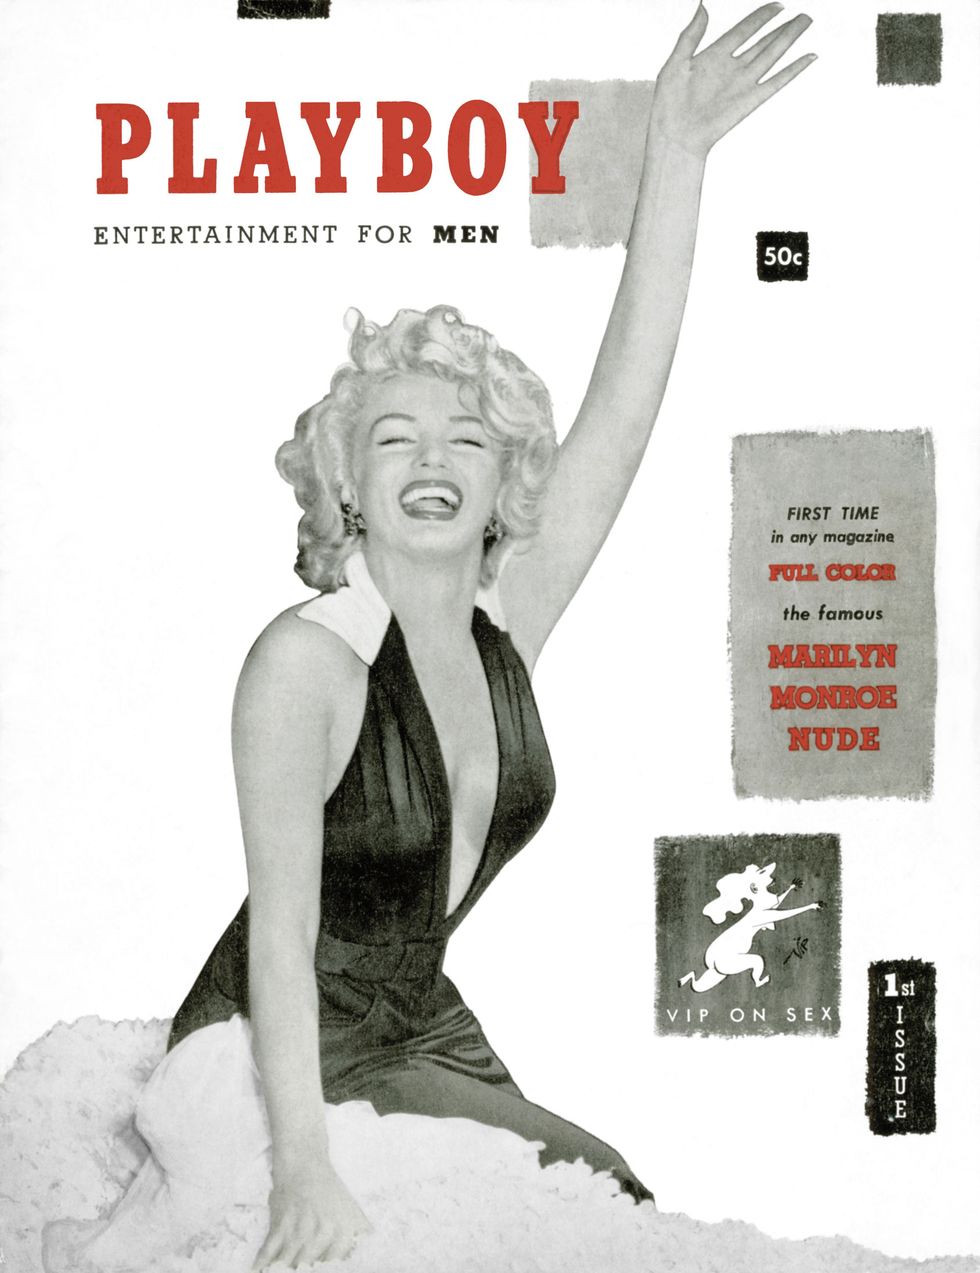 Playboy's Playful Bunny Embodies An Iconic Legacy And Cheeky Brand